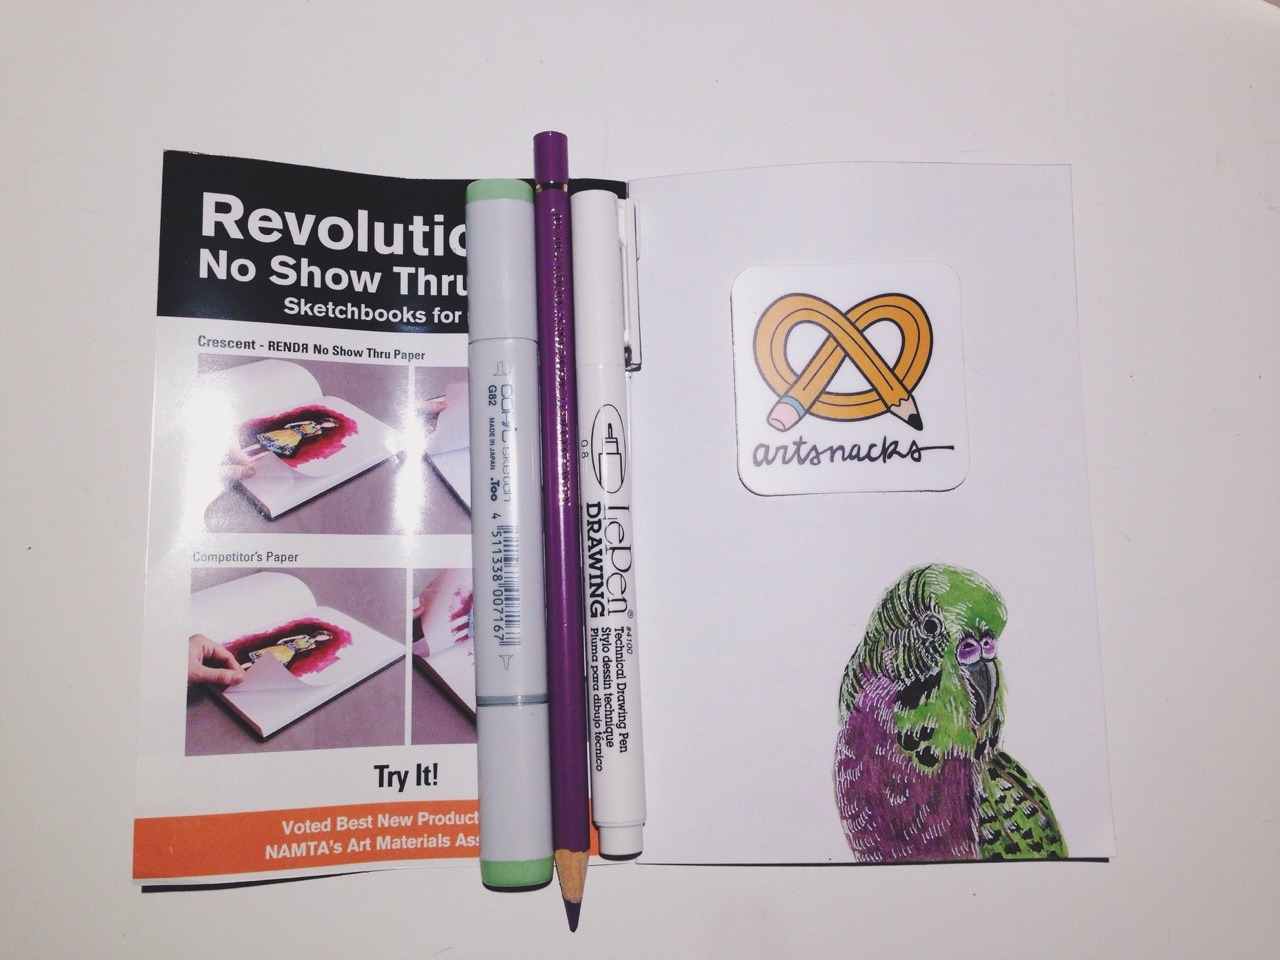 danielleroxy: Artsnacks🍬 ArtSnacks is like a magazine subscription but instead of a magazine you get 4 or 5 different art products to try out. Learn more about ArtSnacks here.